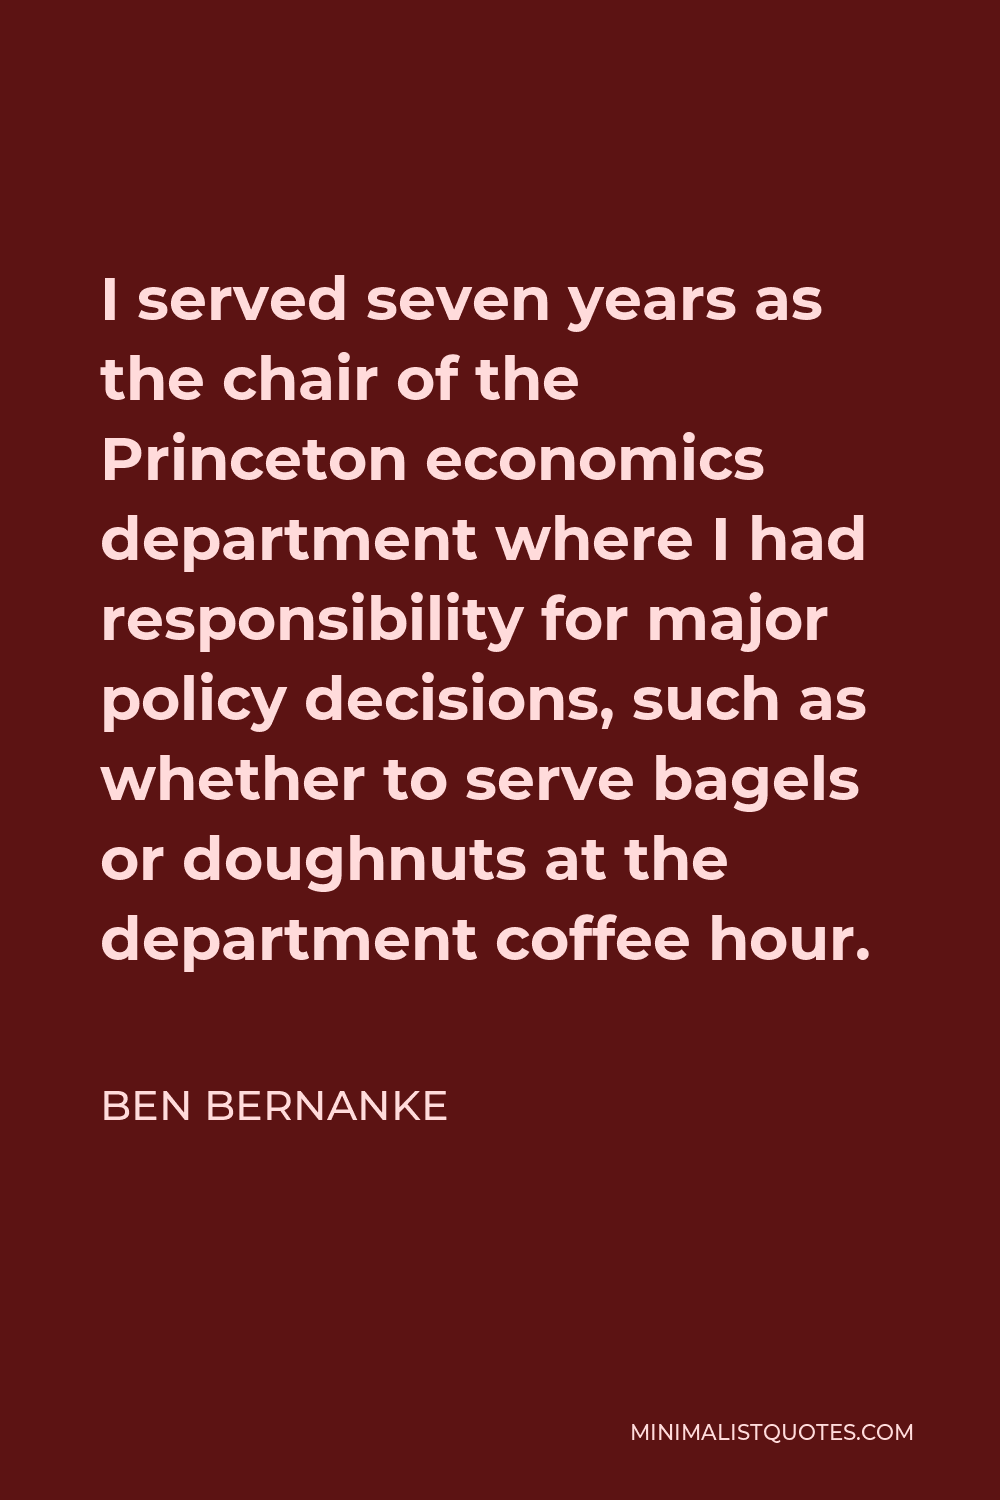 Ben Bernanke Quote - I served seven years as the chair of the Princeton economics department where I had responsibility for major policy decisions, such as whether to serve bagels or doughnuts at the department coffee hour.